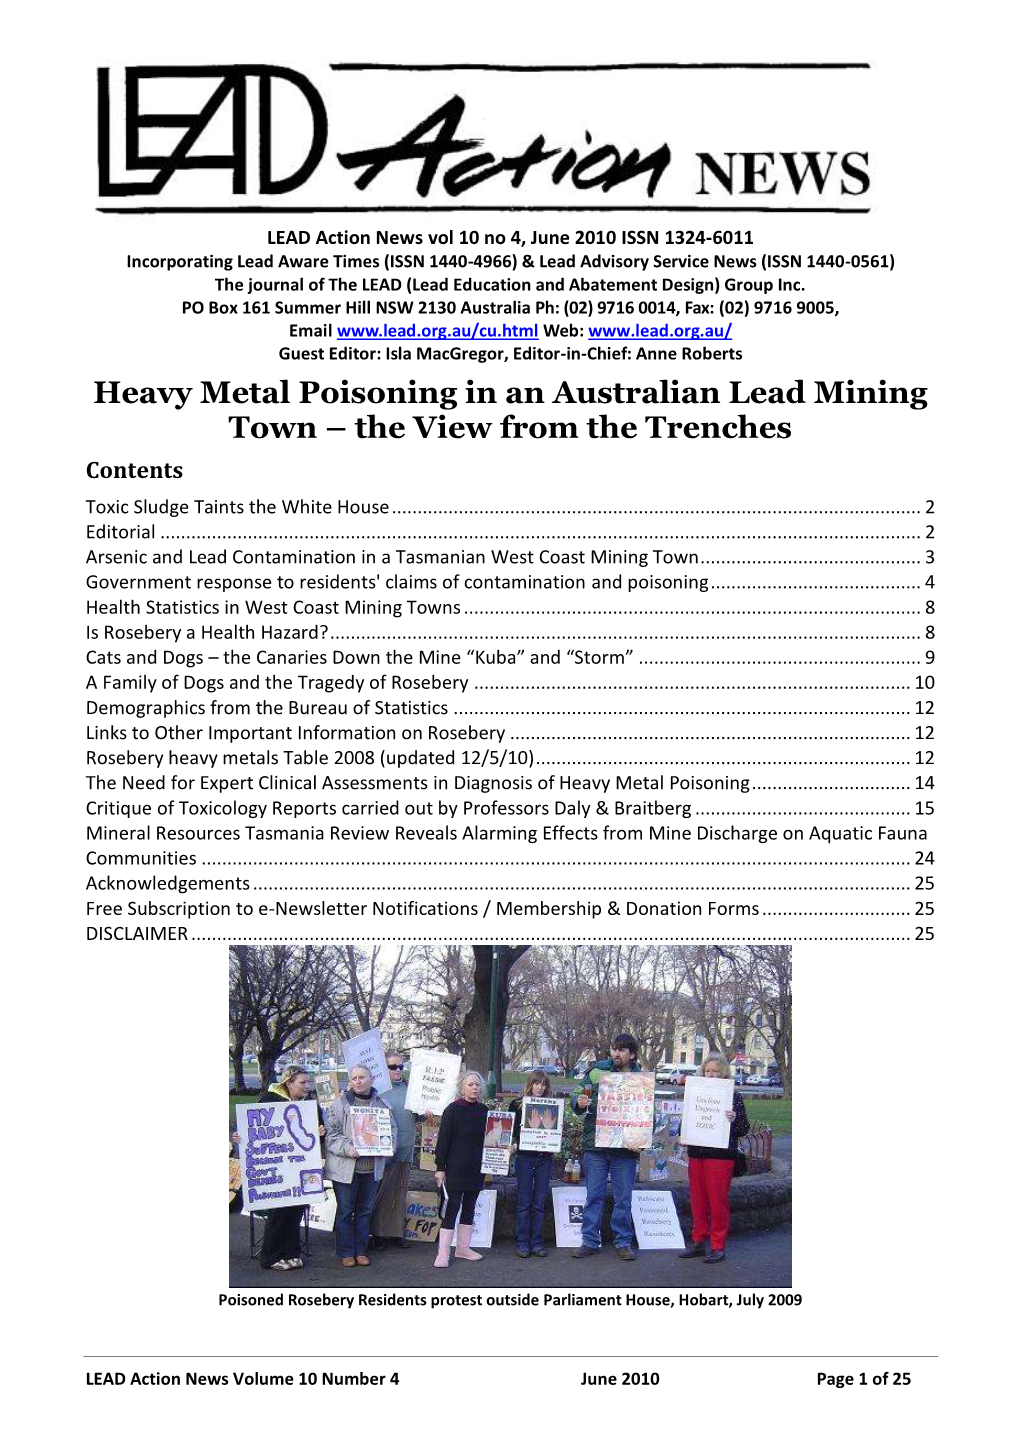 Heavy Metal Poisoning in an Australian Lead Mining Town – the View from the Trenches Contents Toxic Sludge Taints the White House